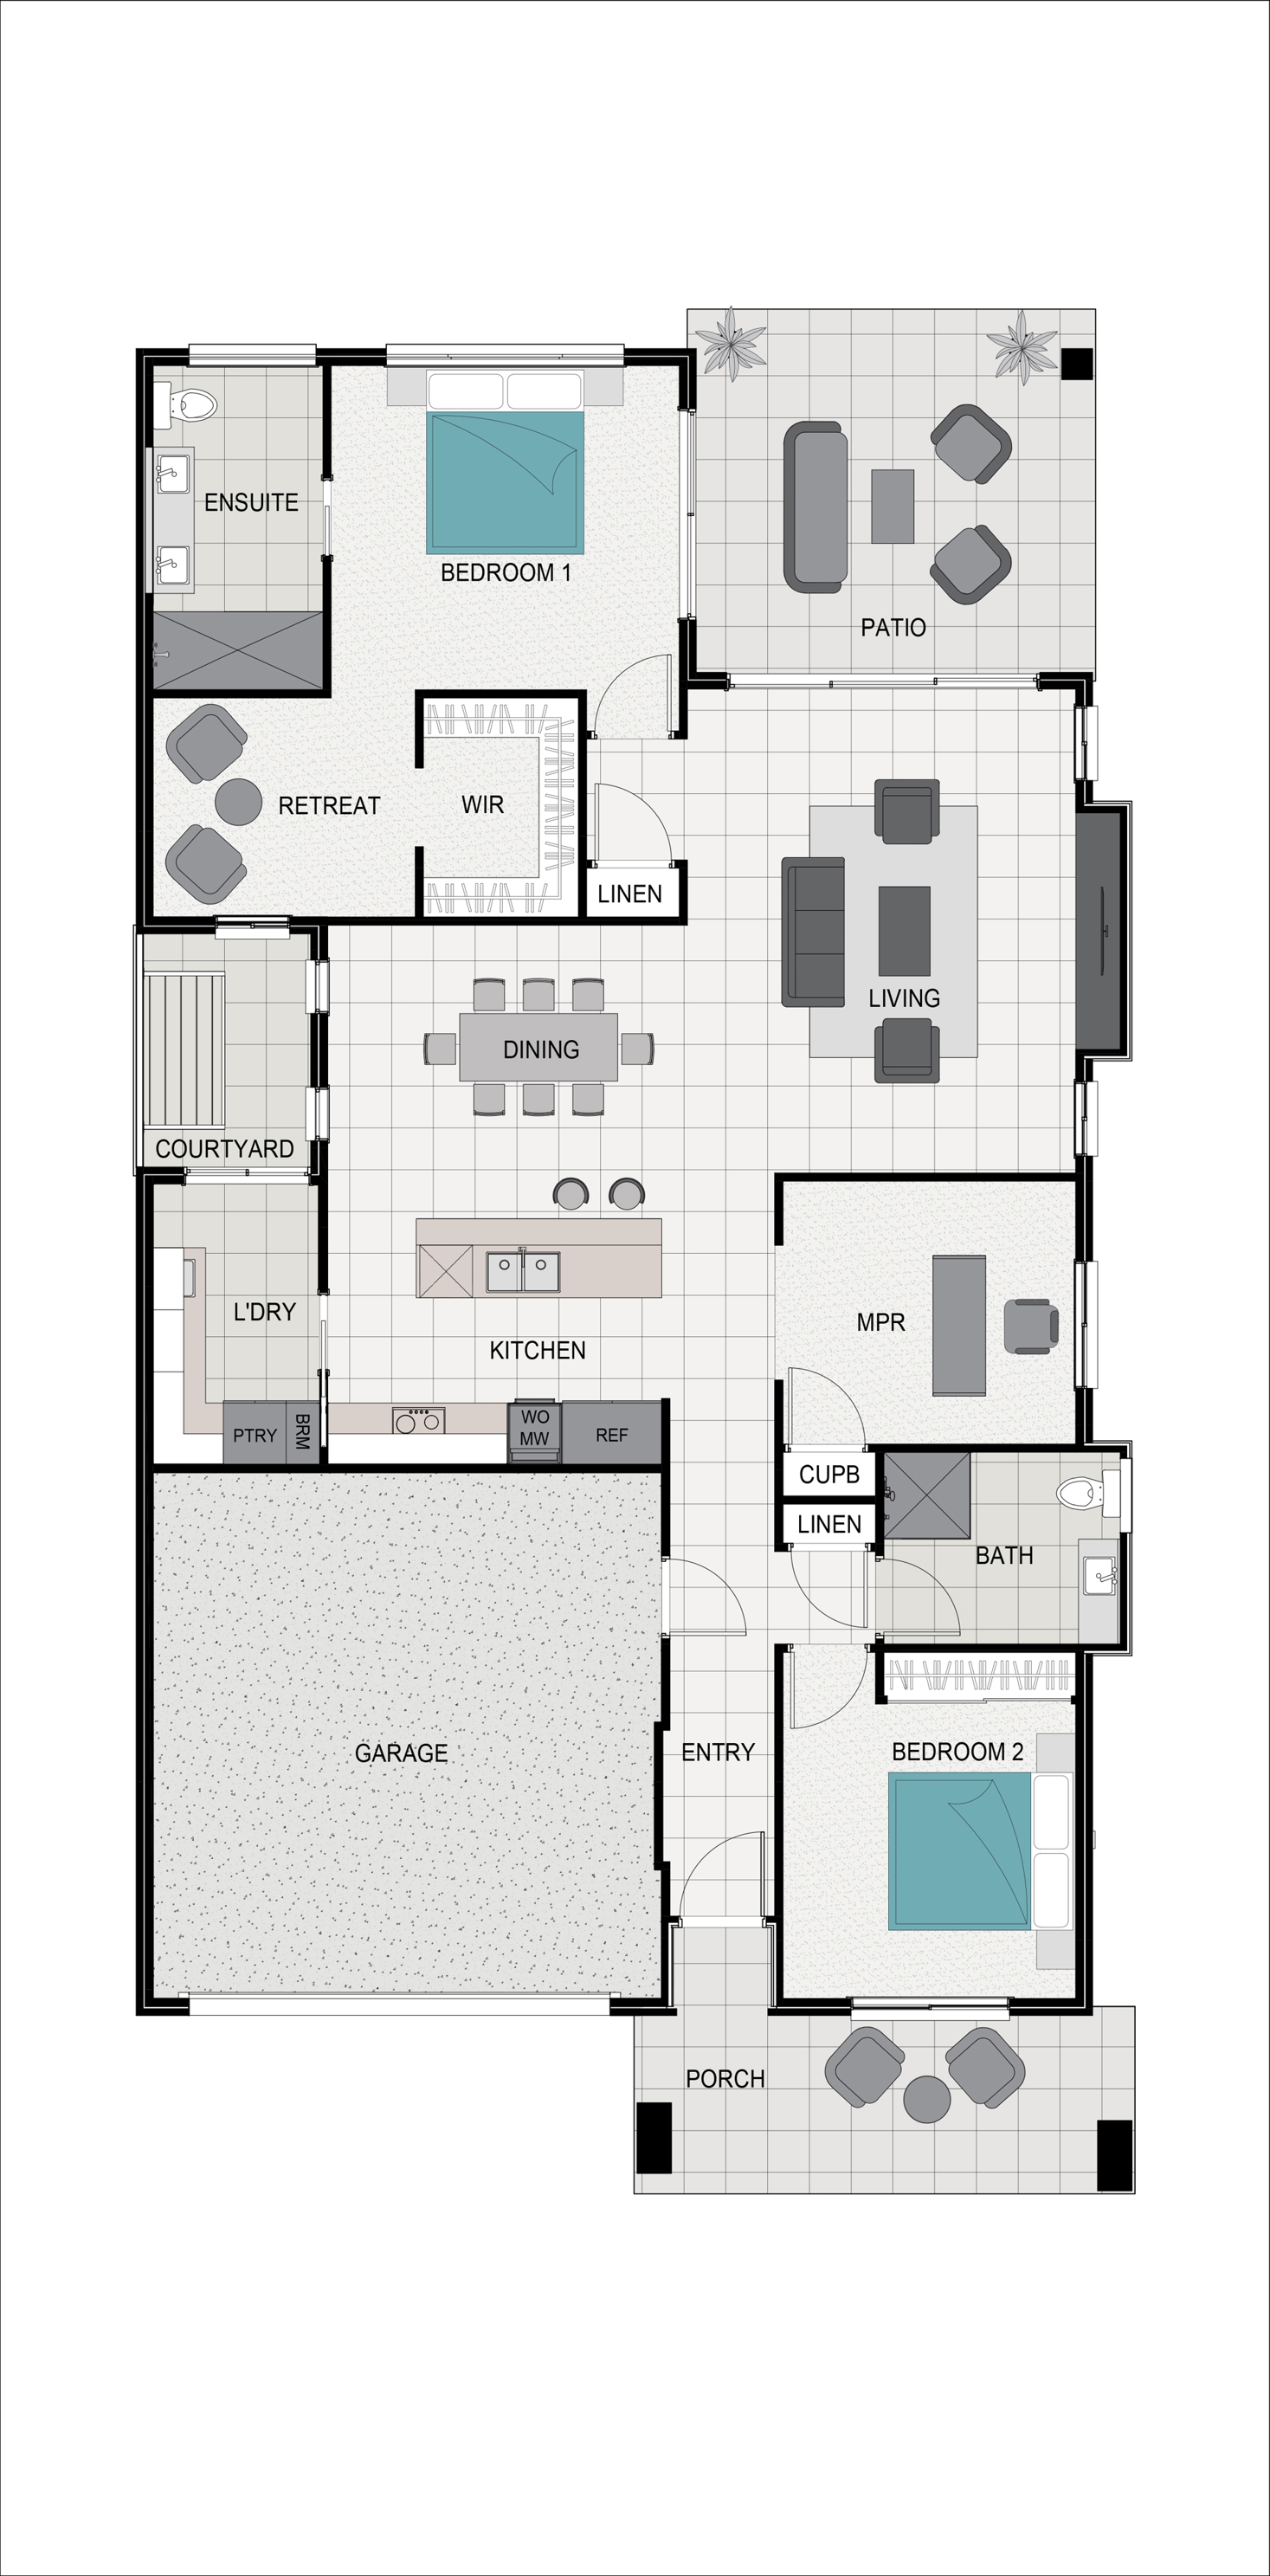 An interior floorplan of a sequoia house type with two bedroom and a multipurpose room at B by Halcyon.